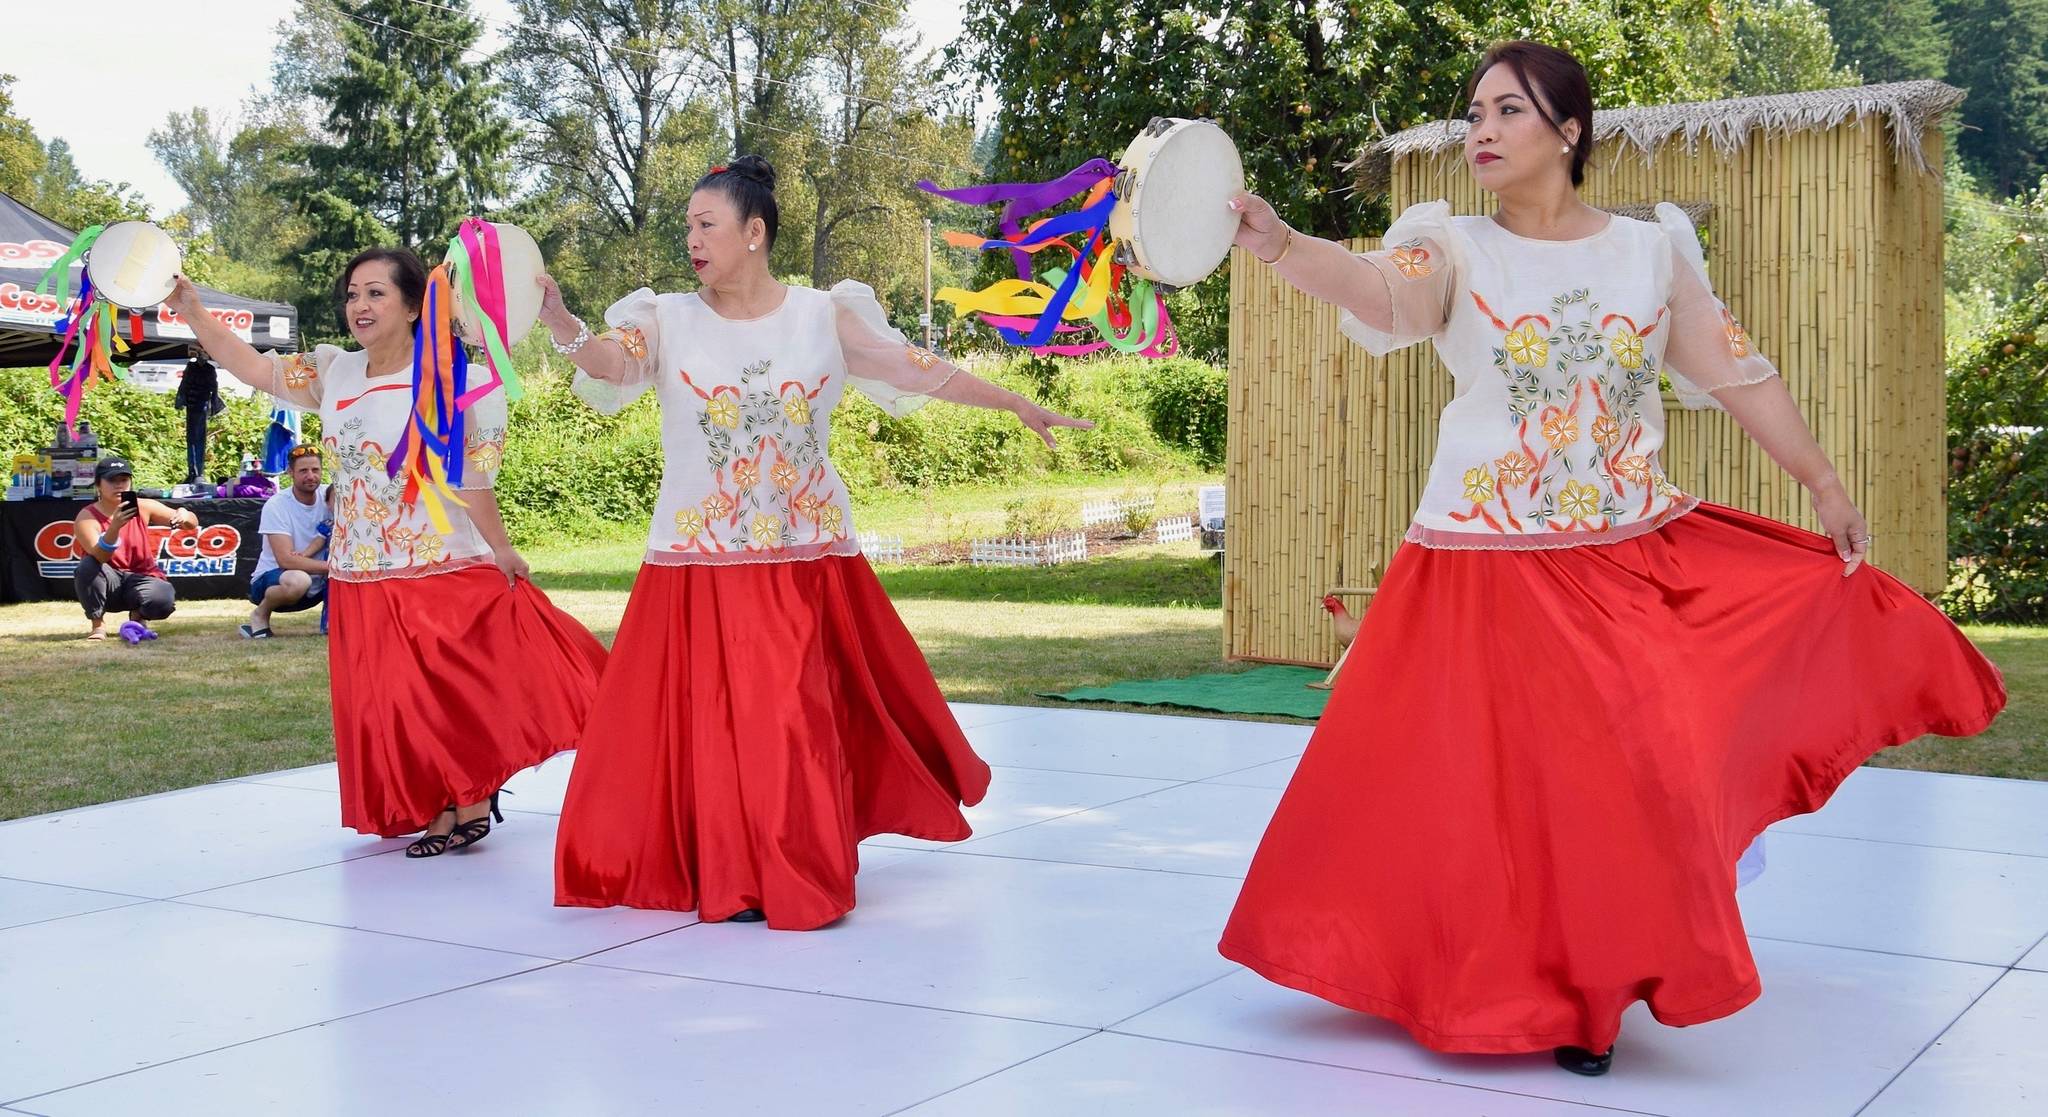 The Filipino American Community of Puget Sound Dance Troupe performs on stage during Filipino Heritage Day at Neely Mansion on Saturday. RACHEL CIAMPI, Auburn Reporter